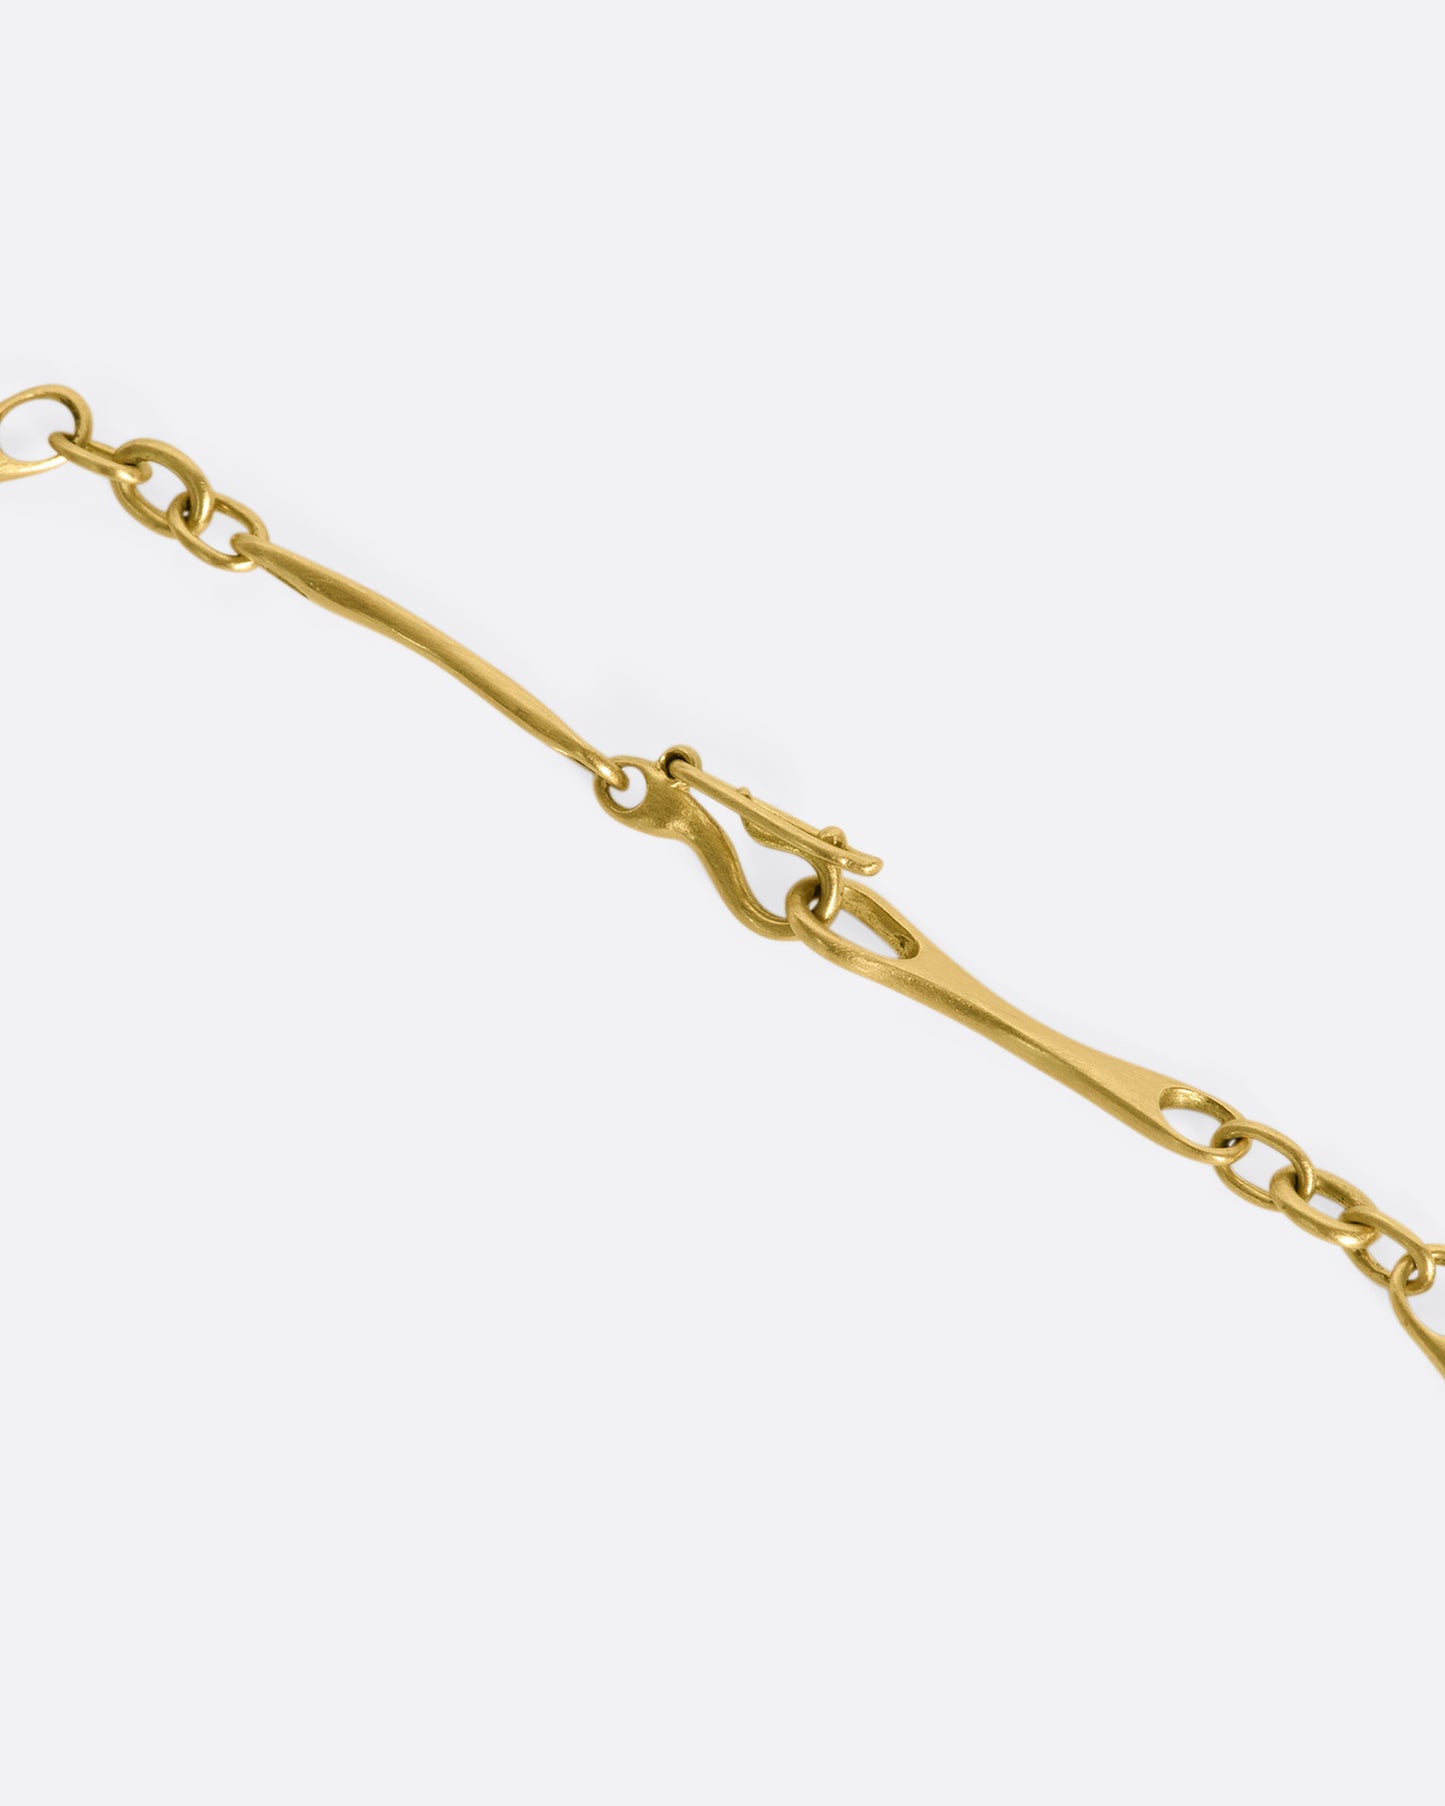 A close up of the clasp of a gold necklace with elongated links with circular cut outs on each end.